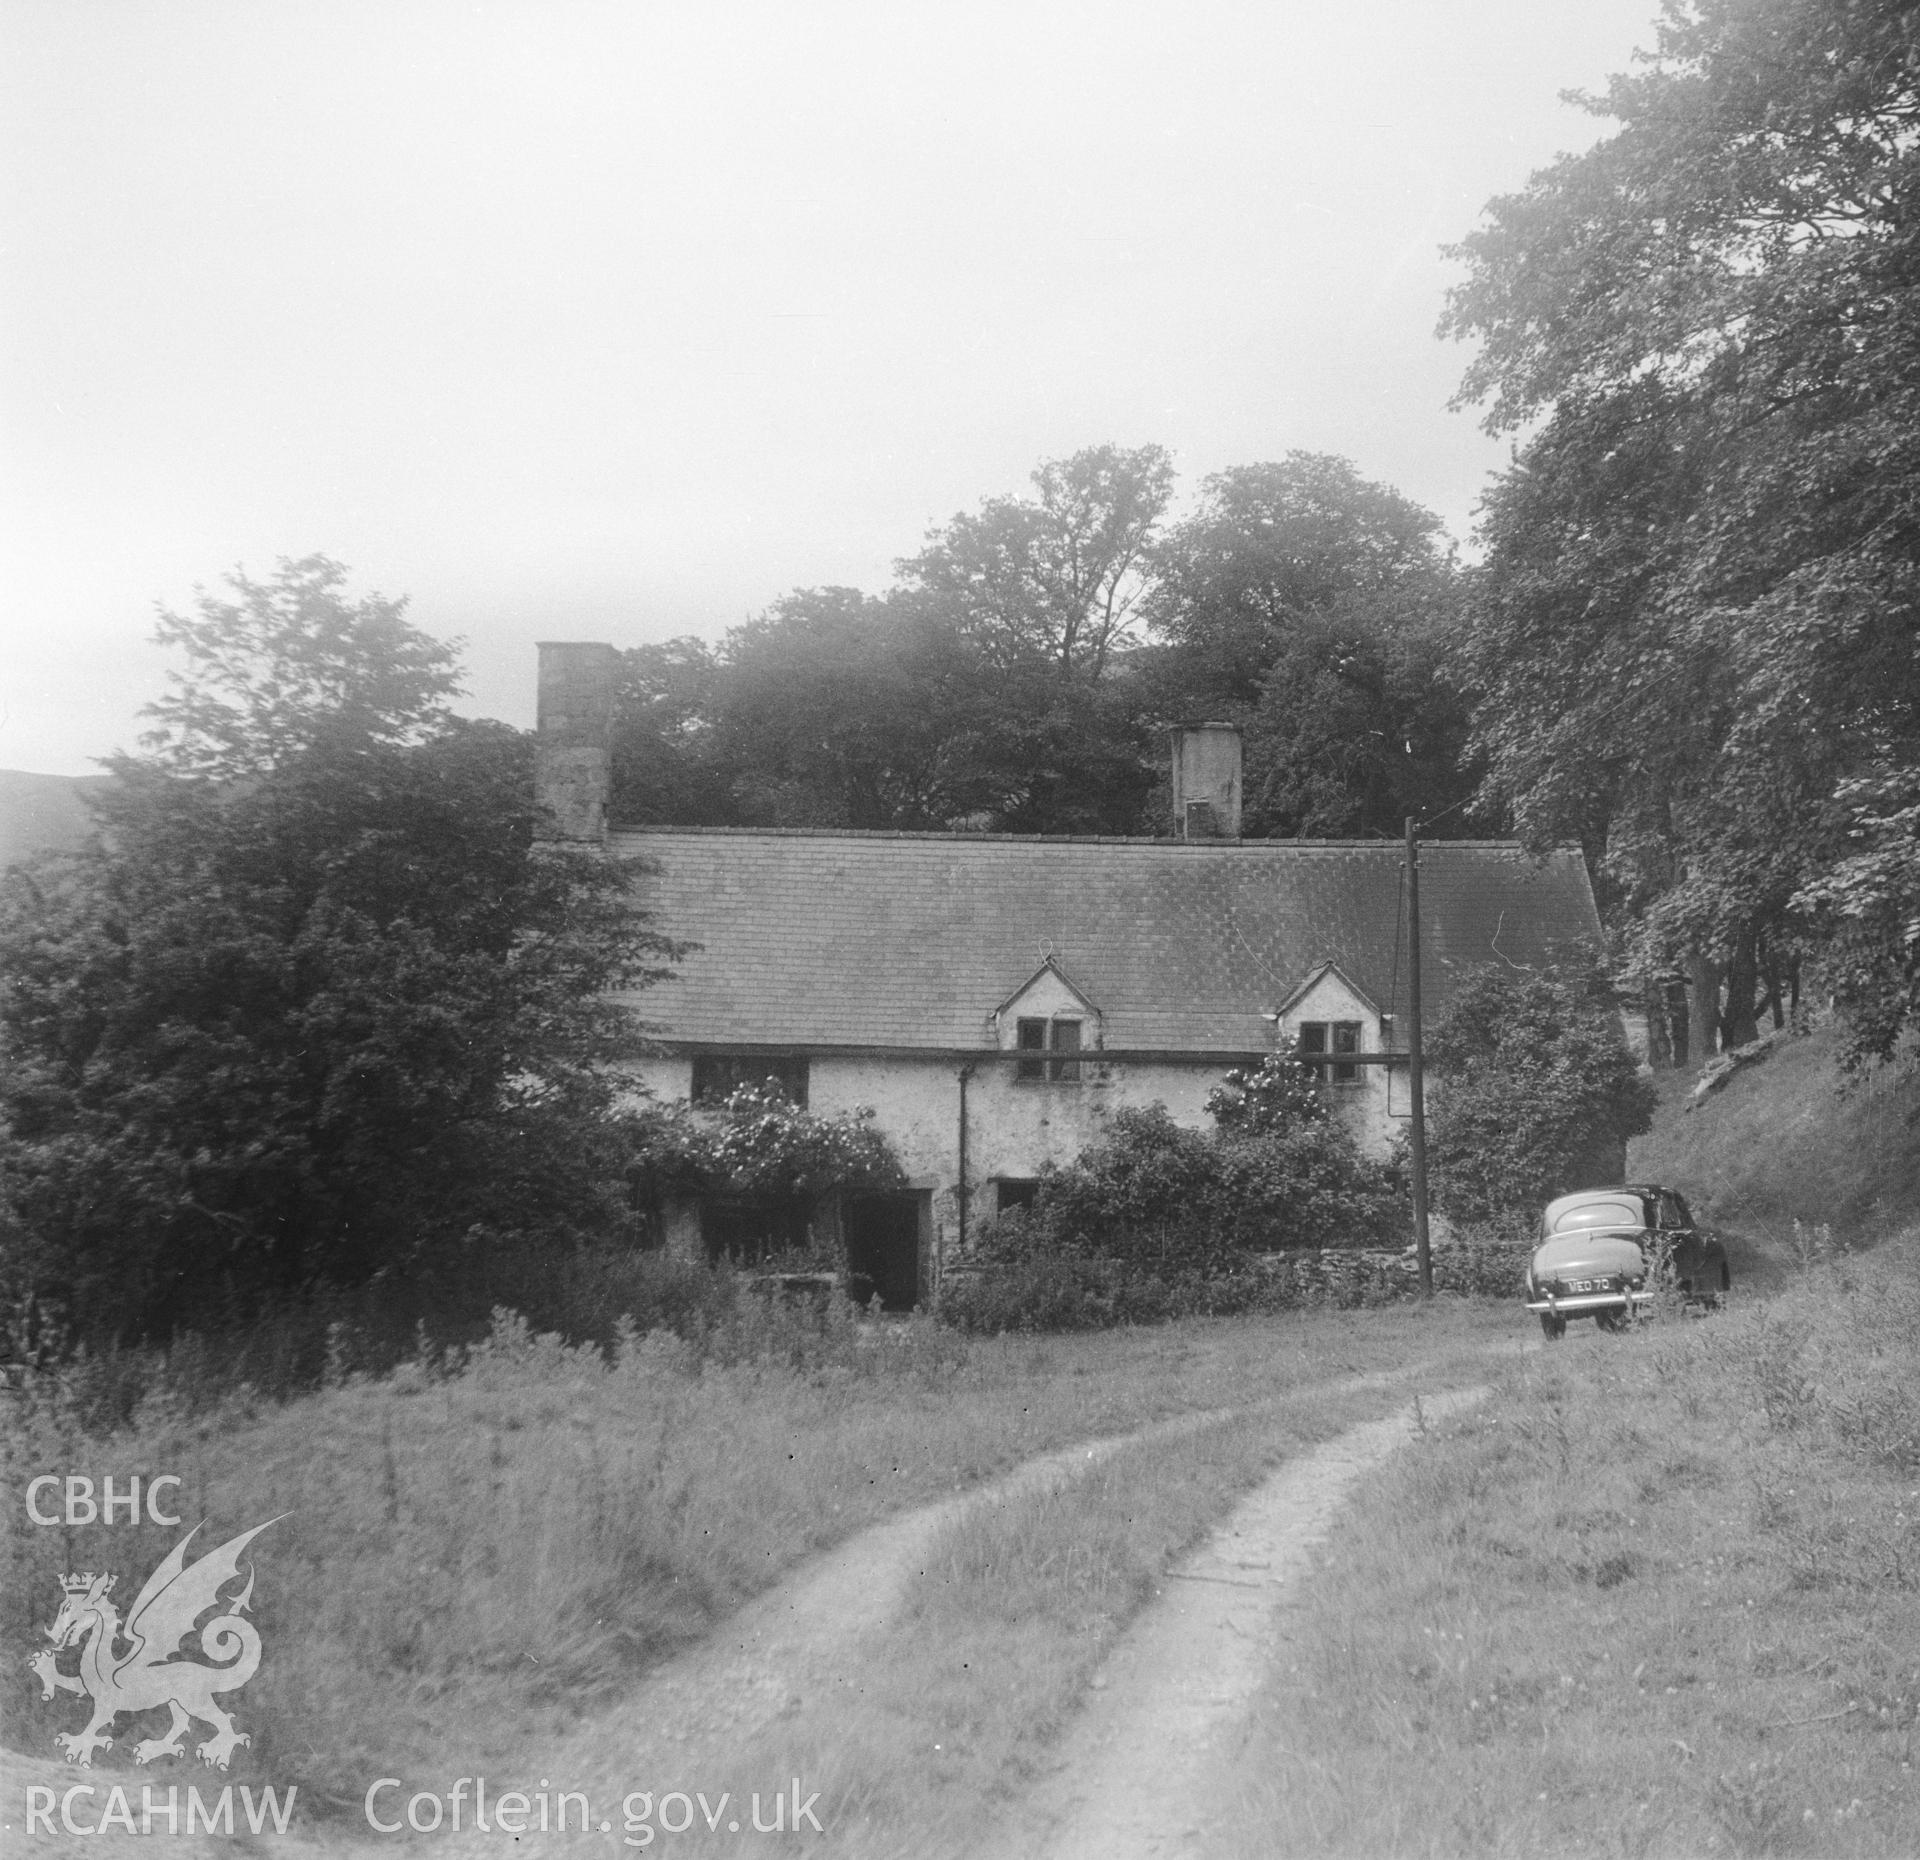 Black and white acetate negative showing exterior driveway and front elevation, Brithdir-Mawr, Cilcain.